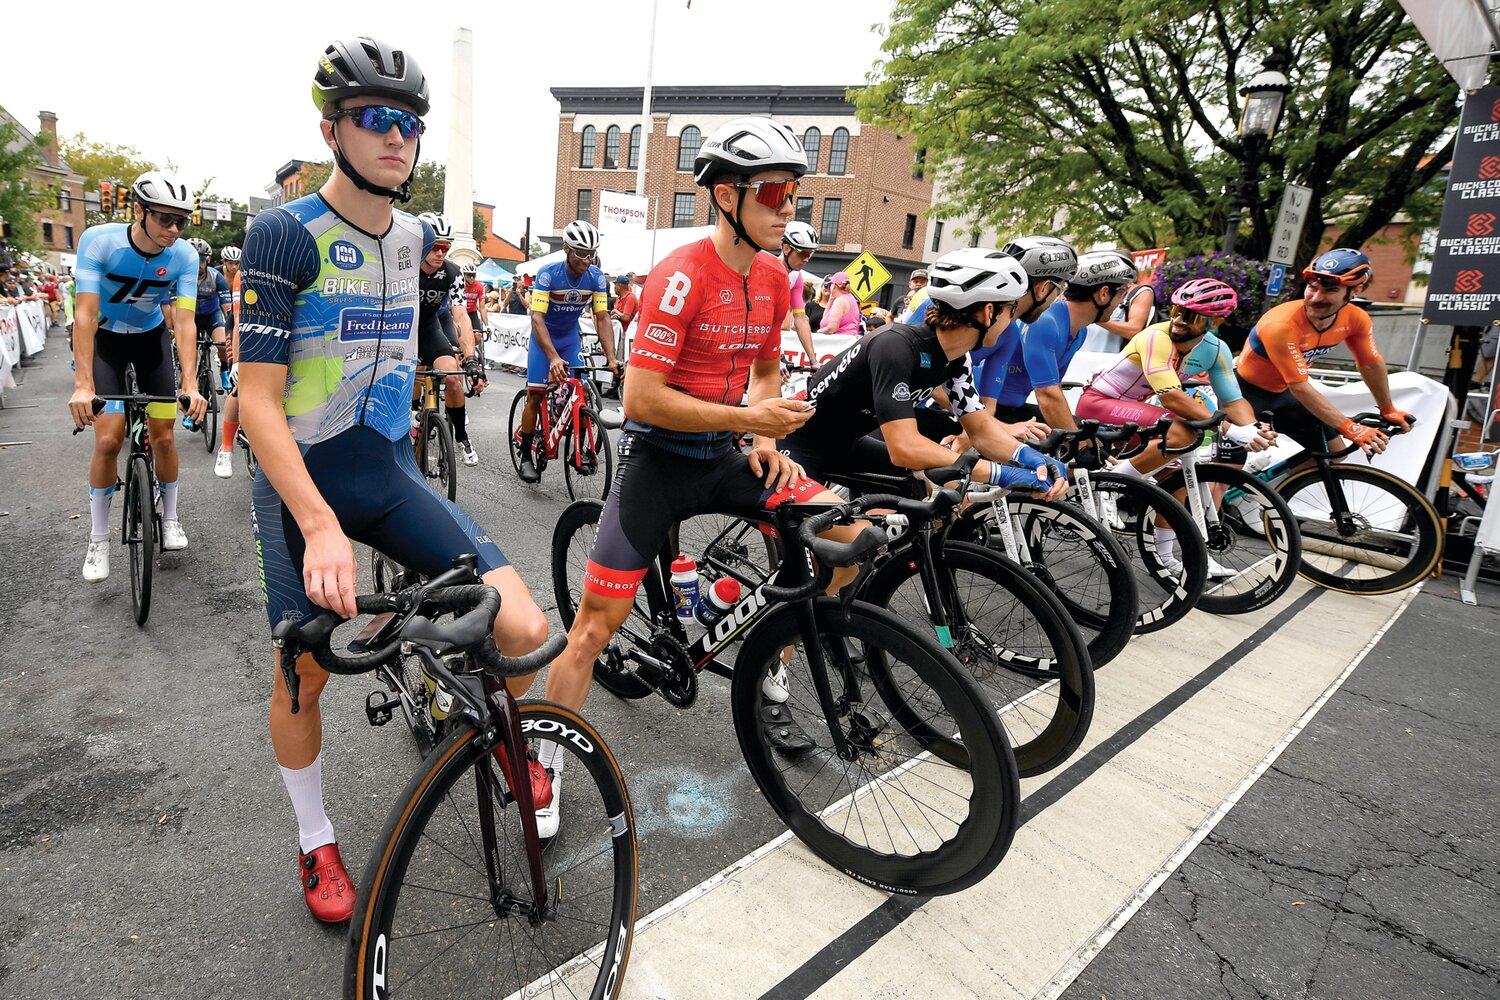 Central Bucks West grad and local Doylestown native Sam Smith of the Bike Works p/b Fred Beans club gets a call up before the start of the men’s pro 1/2 race. A “call up” is when they introduce prominent riders, favorites and past winners to the start line.